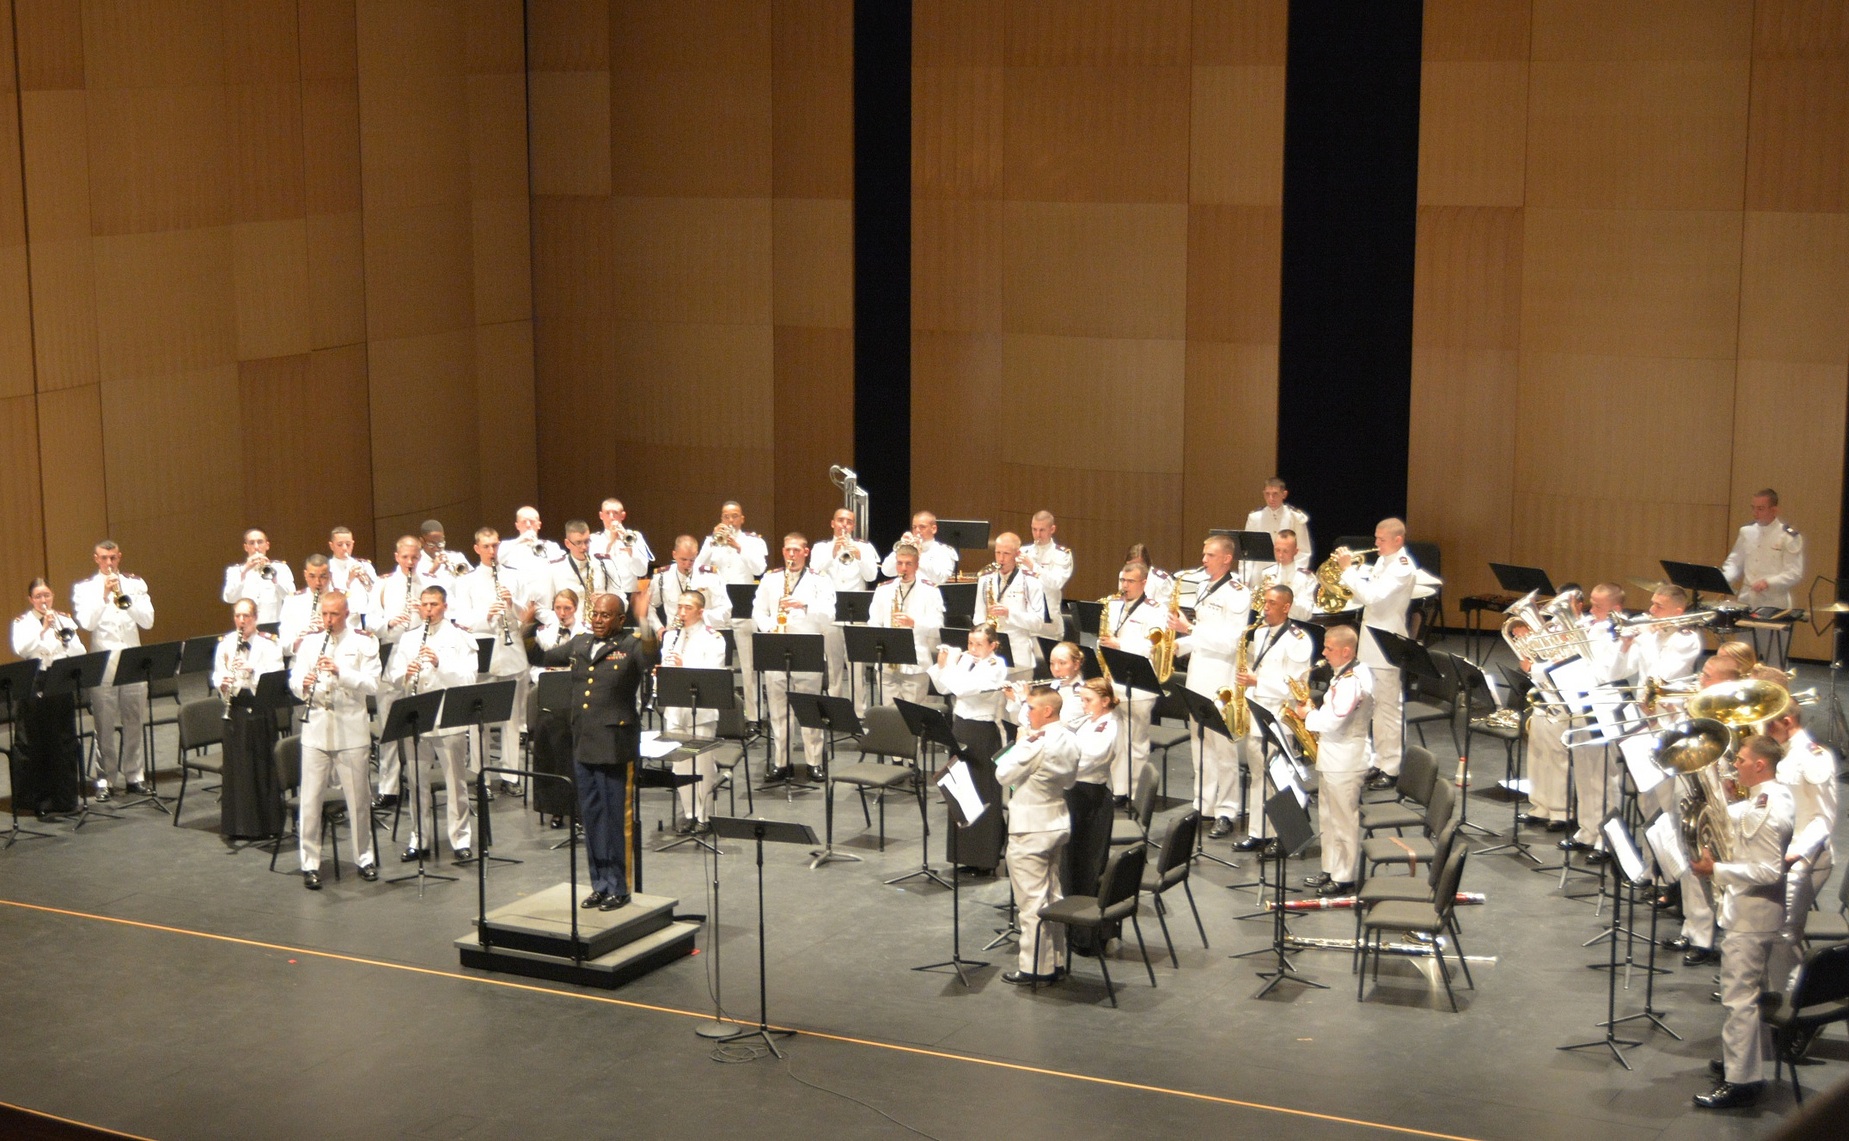 The Concert Band of the Highty-Tighties, the Virginia Tech Corps of Cadets Regimental Band, perform their annual spring concert in the Moss Arts Center.